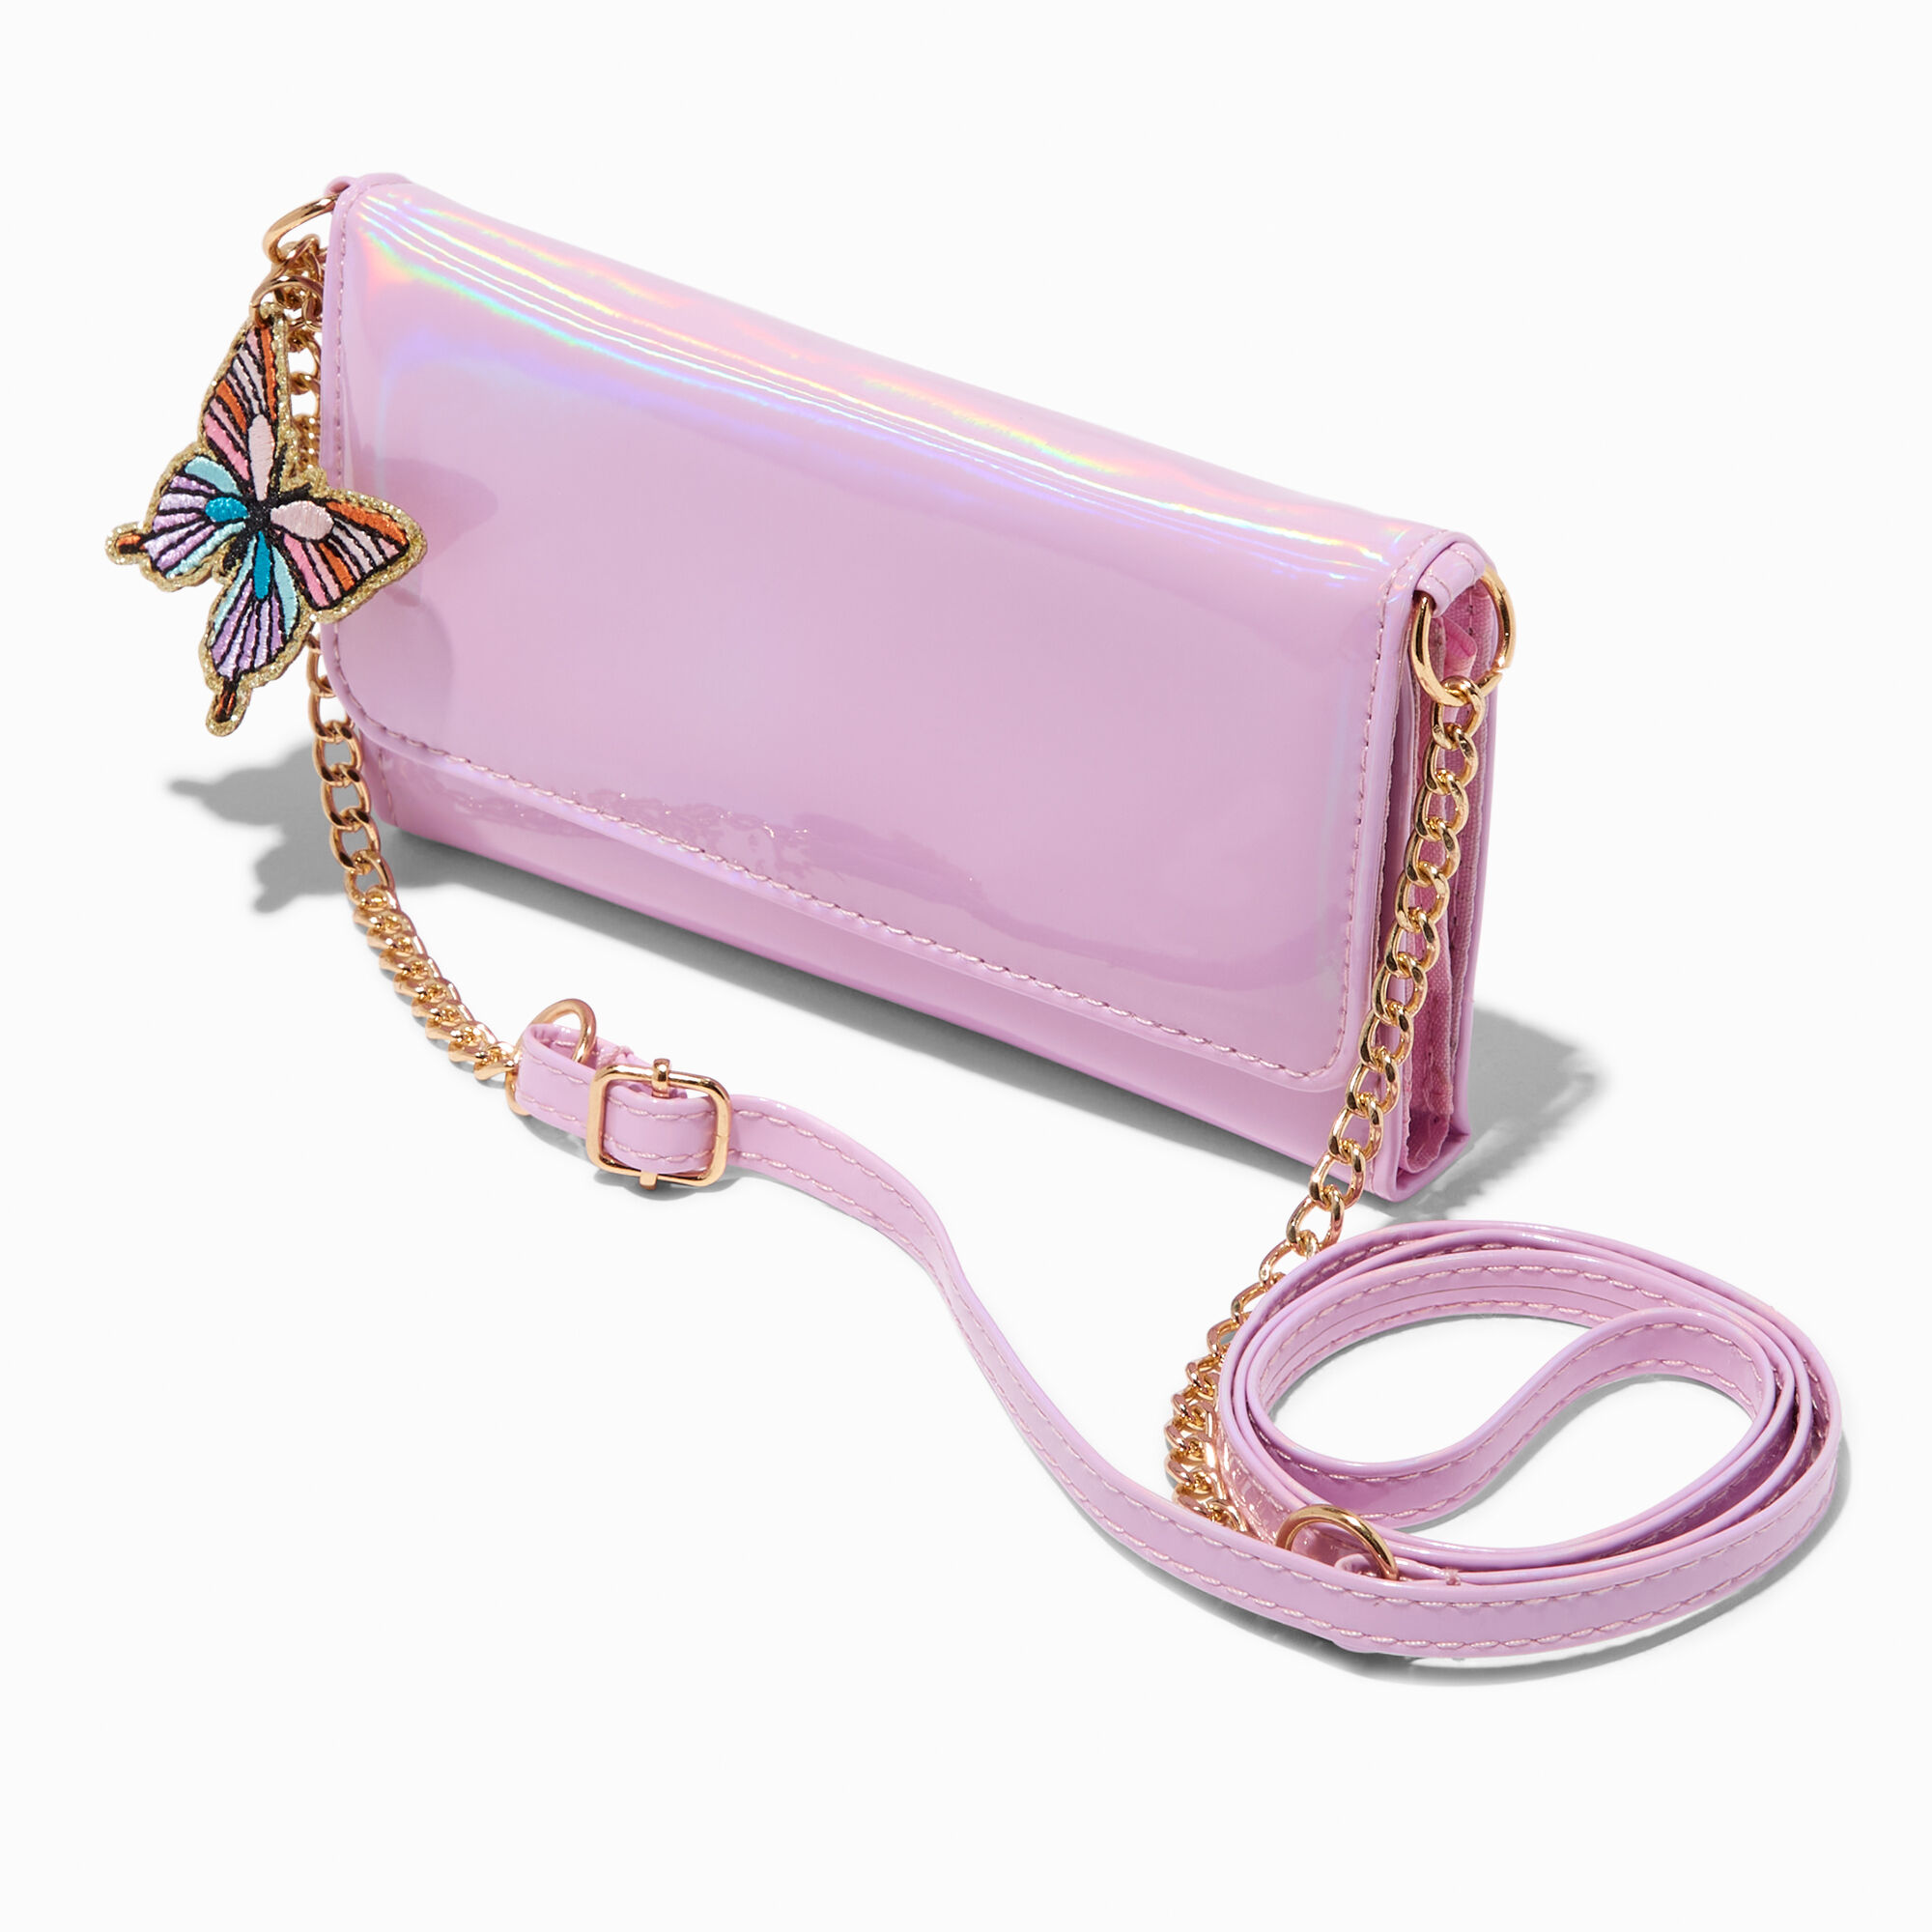 View Claires Butterfly Charm Faux Patent Leather Wallet Chain Pink information